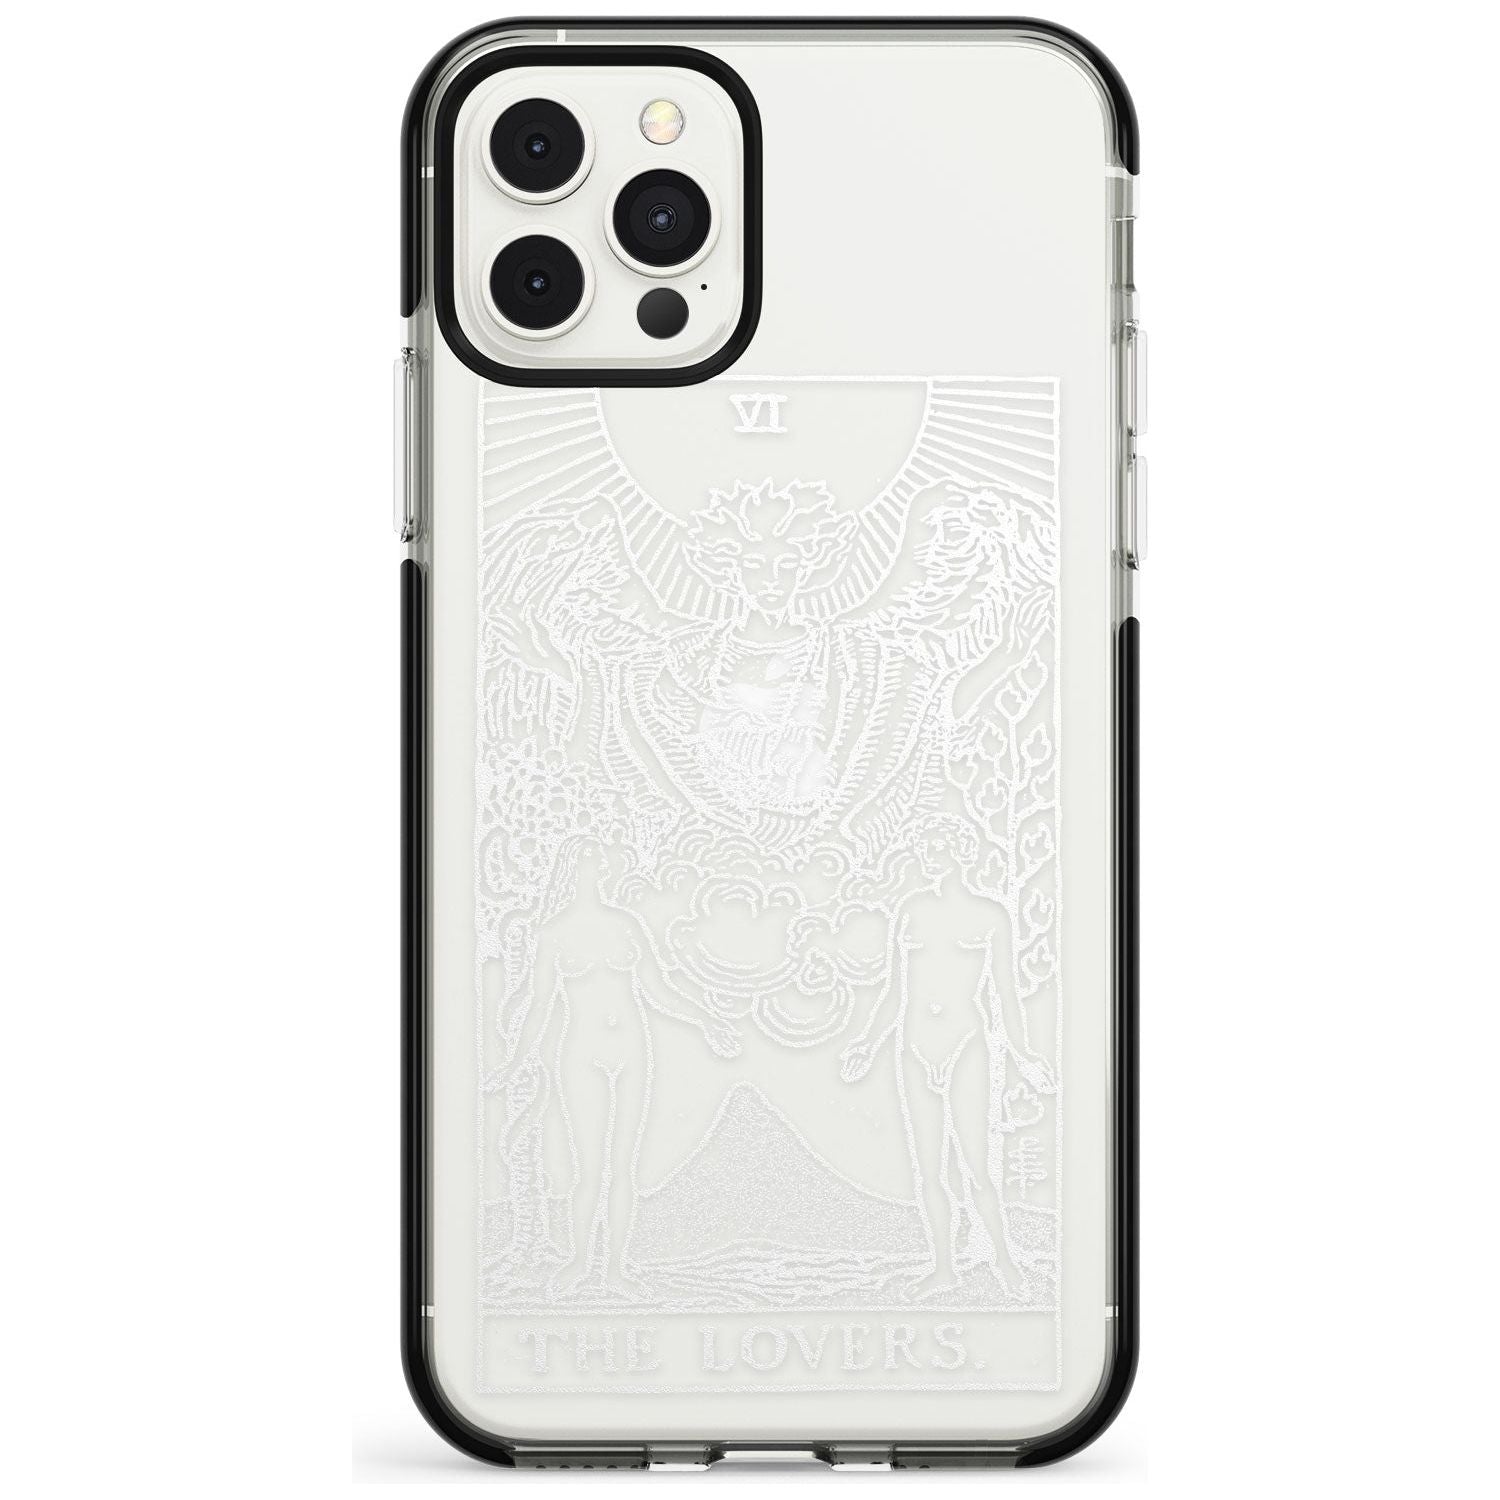 The Lovers Tarot Card - White Transparent Pink Fade Impact Phone Case for iPhone 11